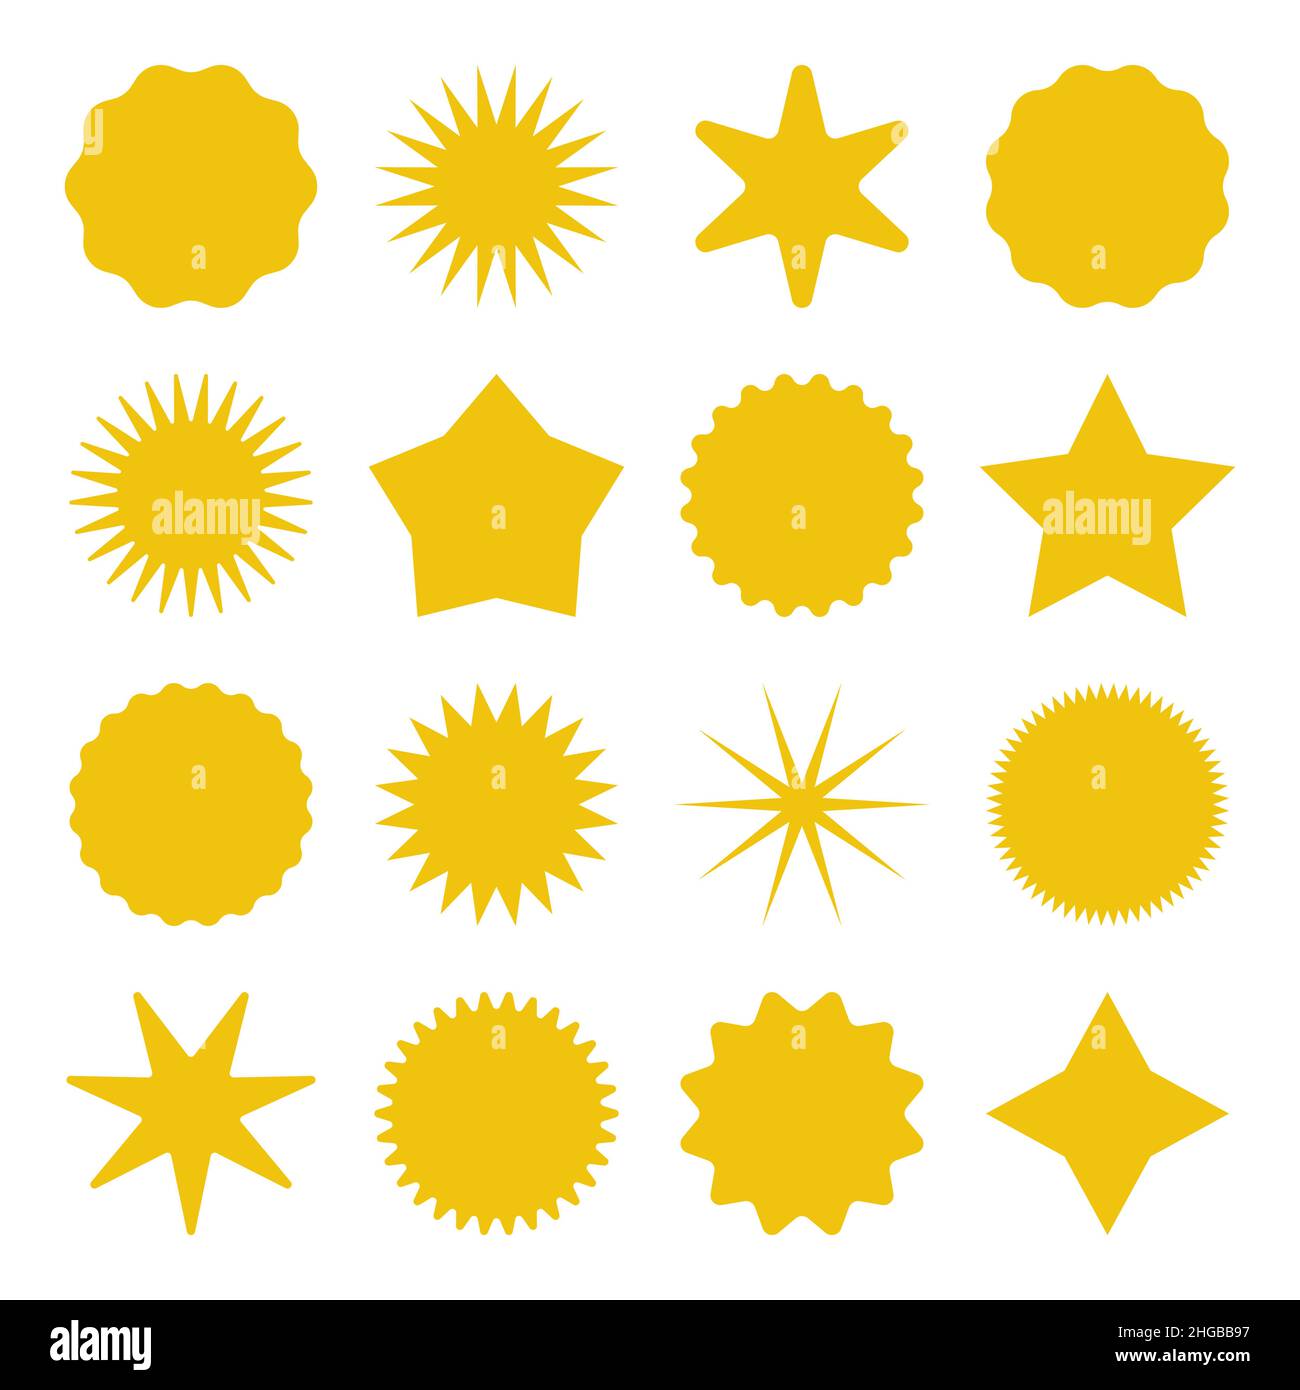 Retro stars, sunburst symbols. Vintage sunbeam icons. Yellow shopping labels, sale or discount sticker, quality mark. Special offer price tag Stock Vector